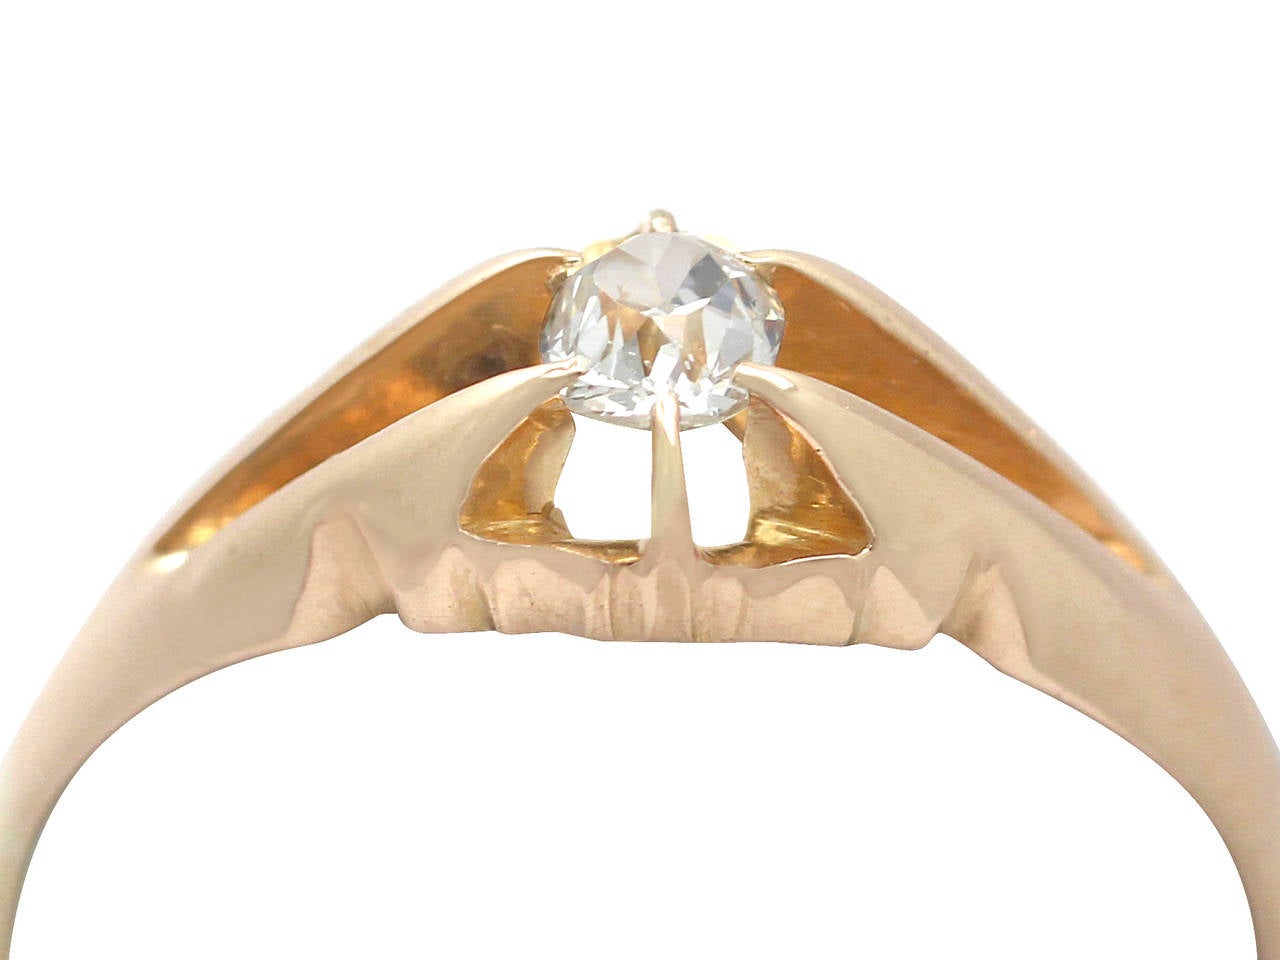 A fine and impressive antique 0.23 carat diamond solitaire ring in 18 karat yellow gold; part our antique jewelry and estate jewelry collections

This fine and impressive antique diamond solitaire ring has been crafted in 18k yellow gold.

The ring